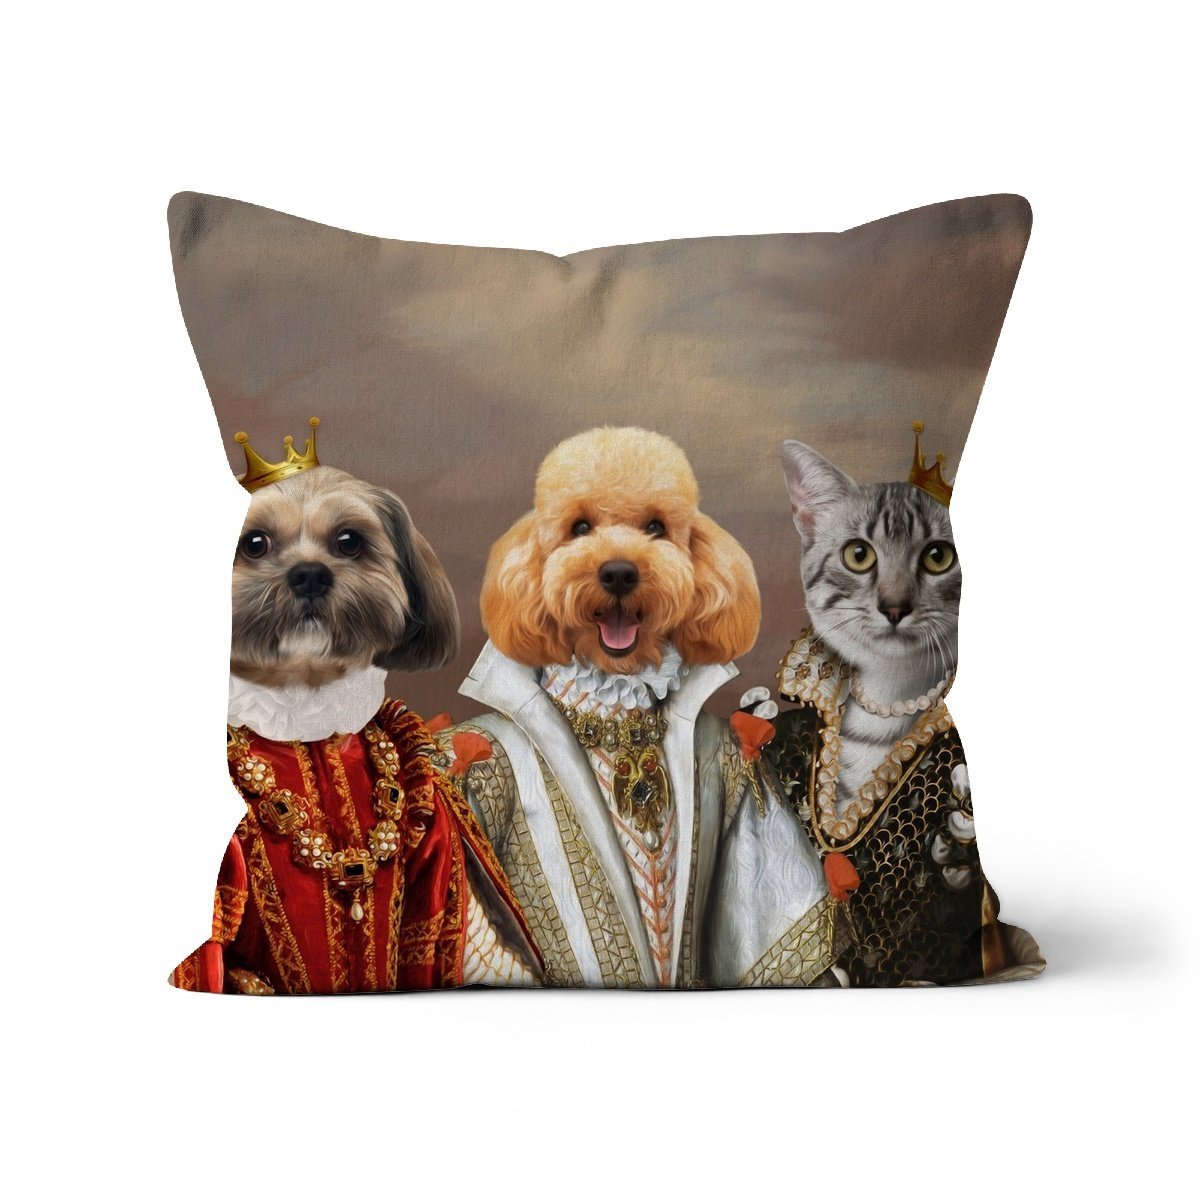 The Queens: Custom Pet Cushion - Paw & Glory - #pet portraits# - #dog portraits# - #pet portraits uk#paw and glory, custom pet portrait cushion,print pet on pillow, custom cat pillows, pet face pillow, pet print pillow, dog on pillow